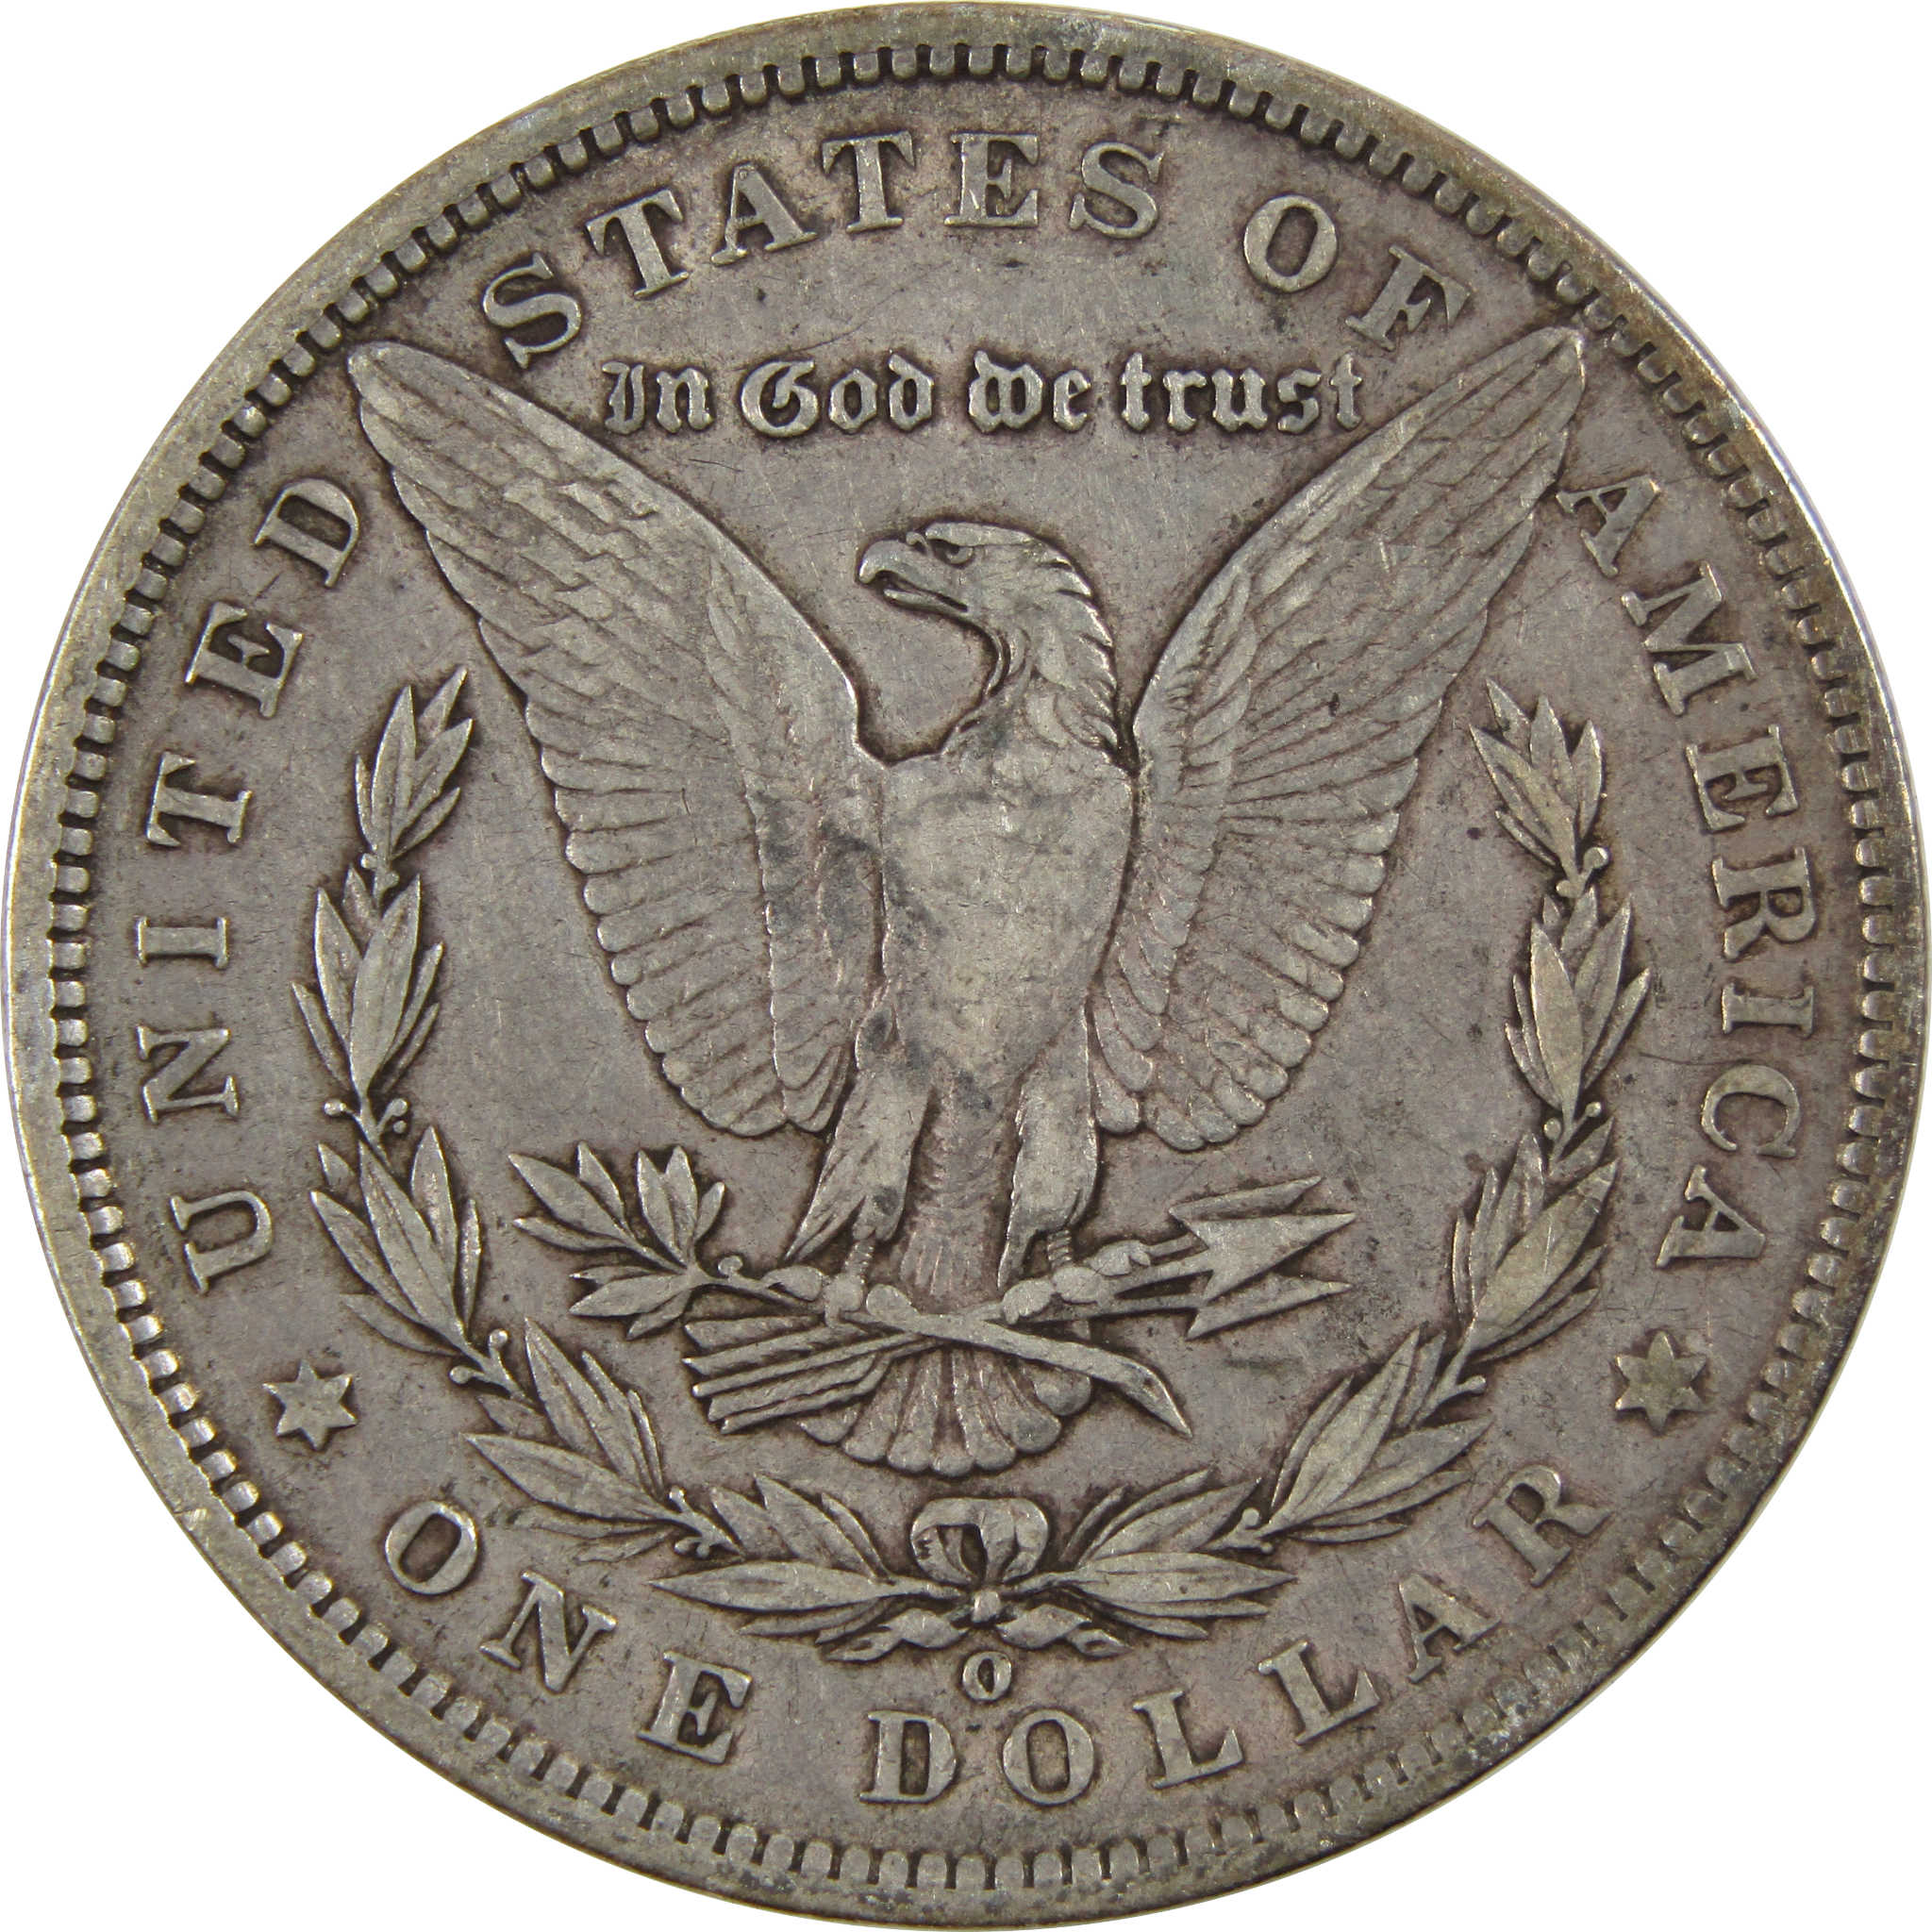 1886 O Morgan Dollar XF EF Extremely Fine 90% Silver $1 Coin SKU:I3966 - Morgan coin - Morgan silver dollar - Morgan silver dollar for sale - Profile Coins &amp; Collectibles